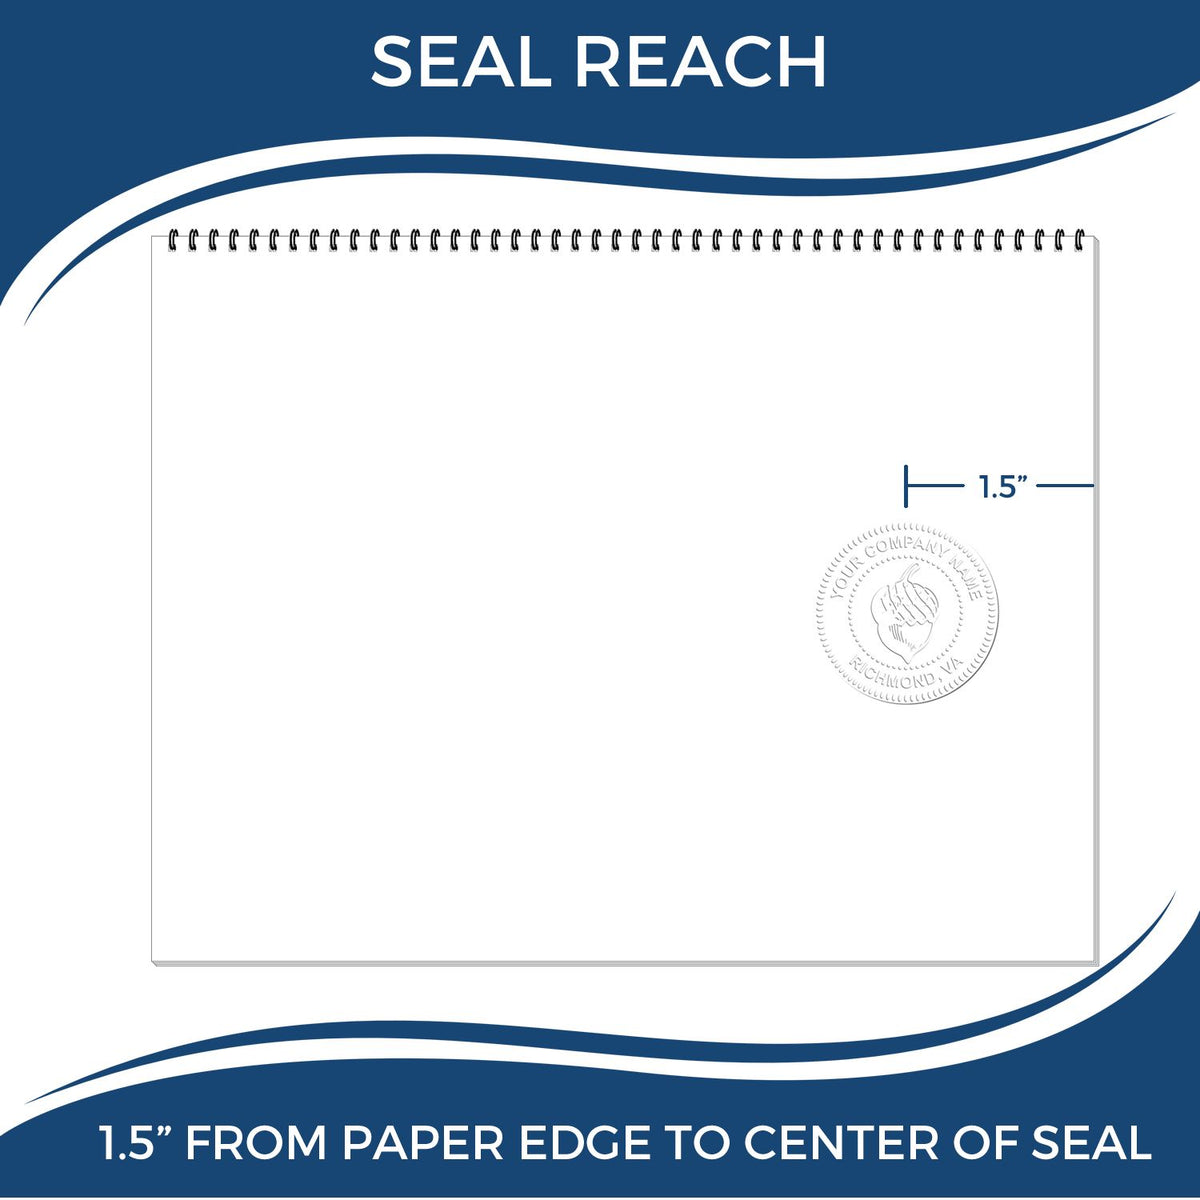 An infographic showing the seal reach which is represented by a ruler and a miniature seal image of the Gift West Virginia Architect Seal